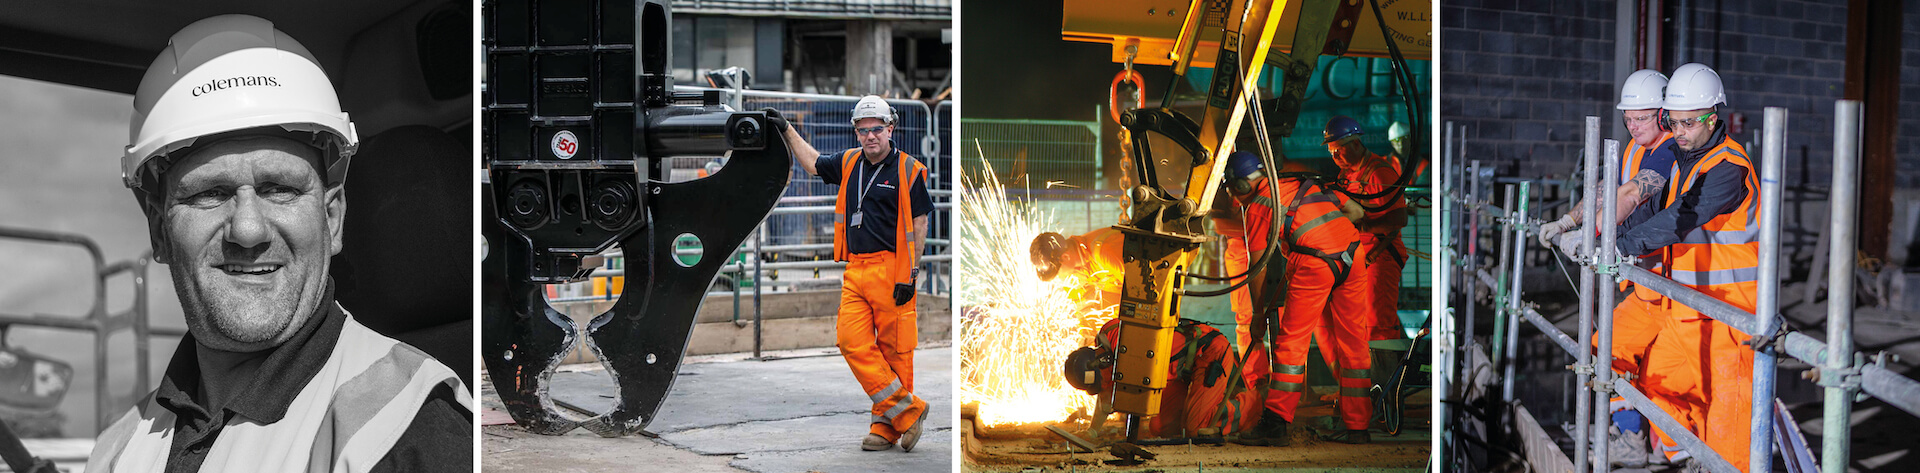 four images of workmen onsite wearing protective wear. Image one is a machine operative smiling, second image is of a man leaning on an ultra large machinery pick/muncher, image 3 shows several workers carrying out hot works, sparks are flying. Image four shows two workers standing on a scaffold.